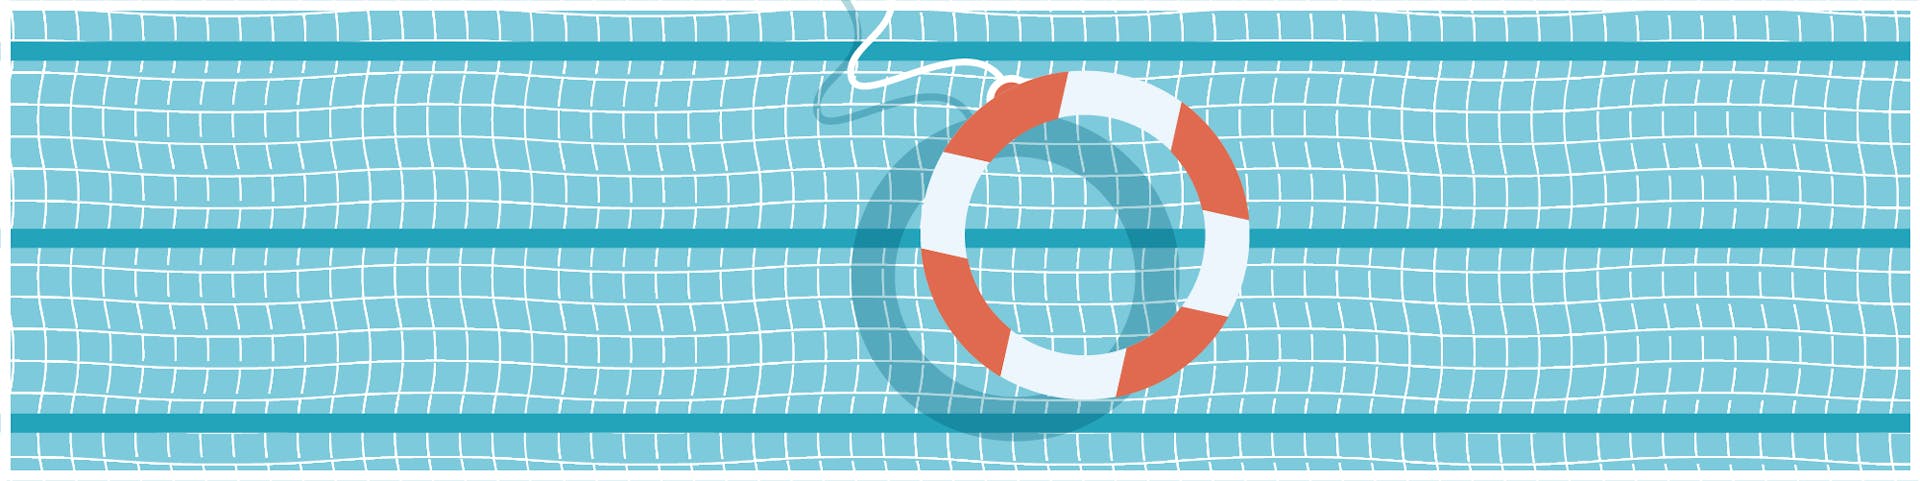 A rubber ring in a pool.